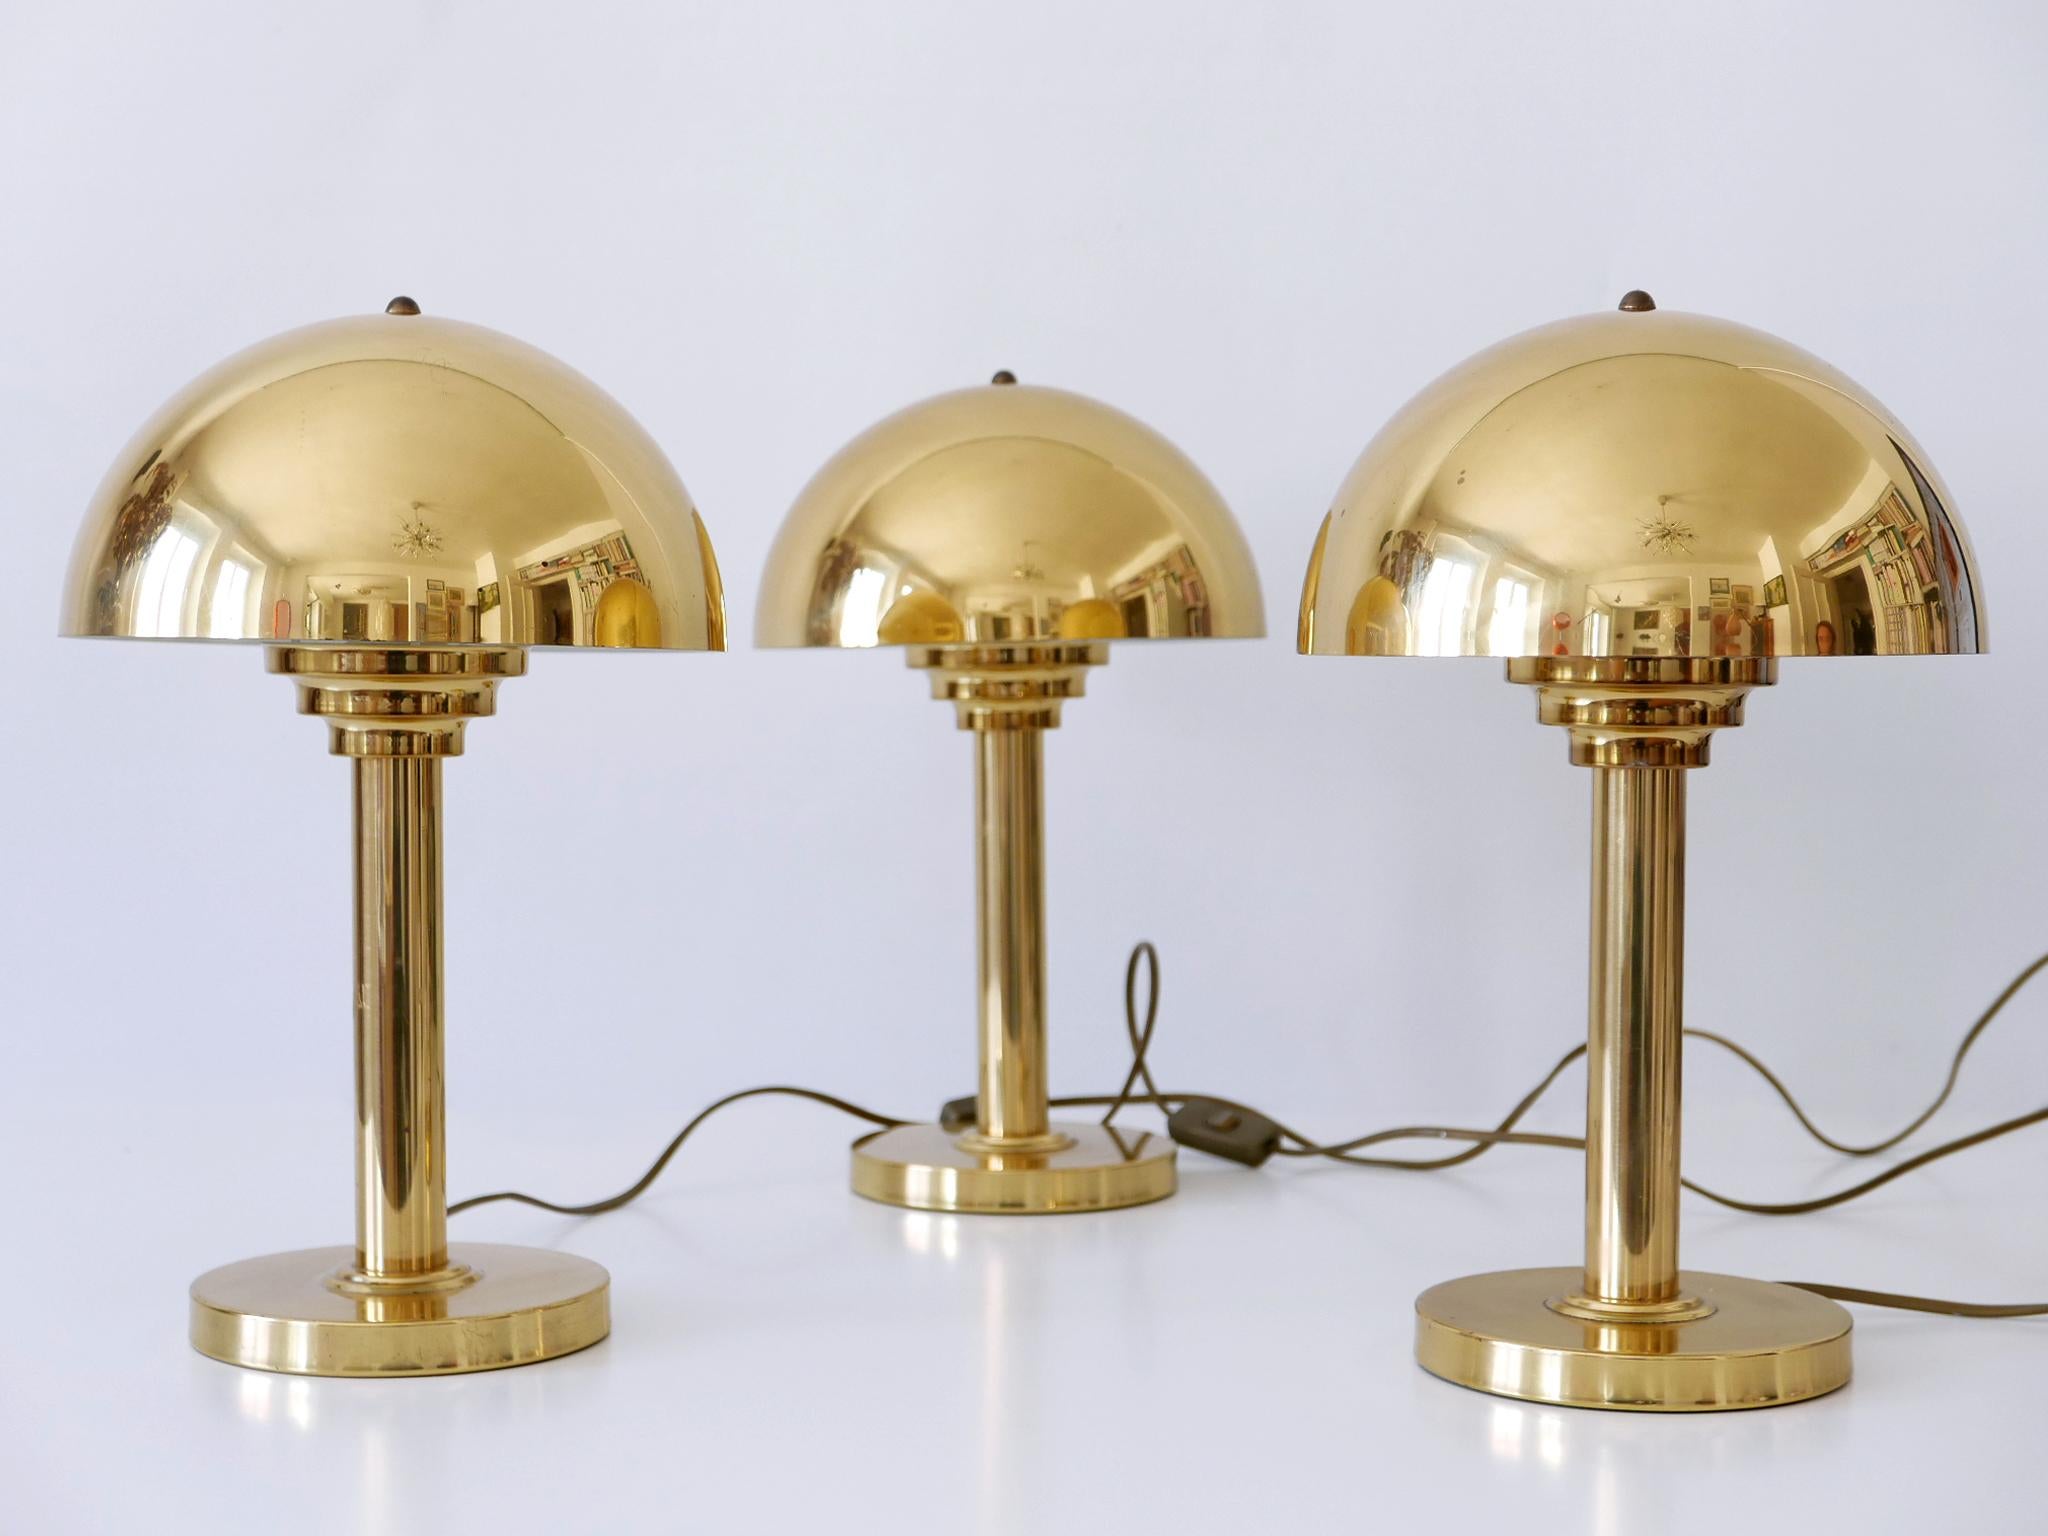 Elegant Mid-Century Modern Brass Table Lamps by WSB, Germany, 1960s For Sale 8